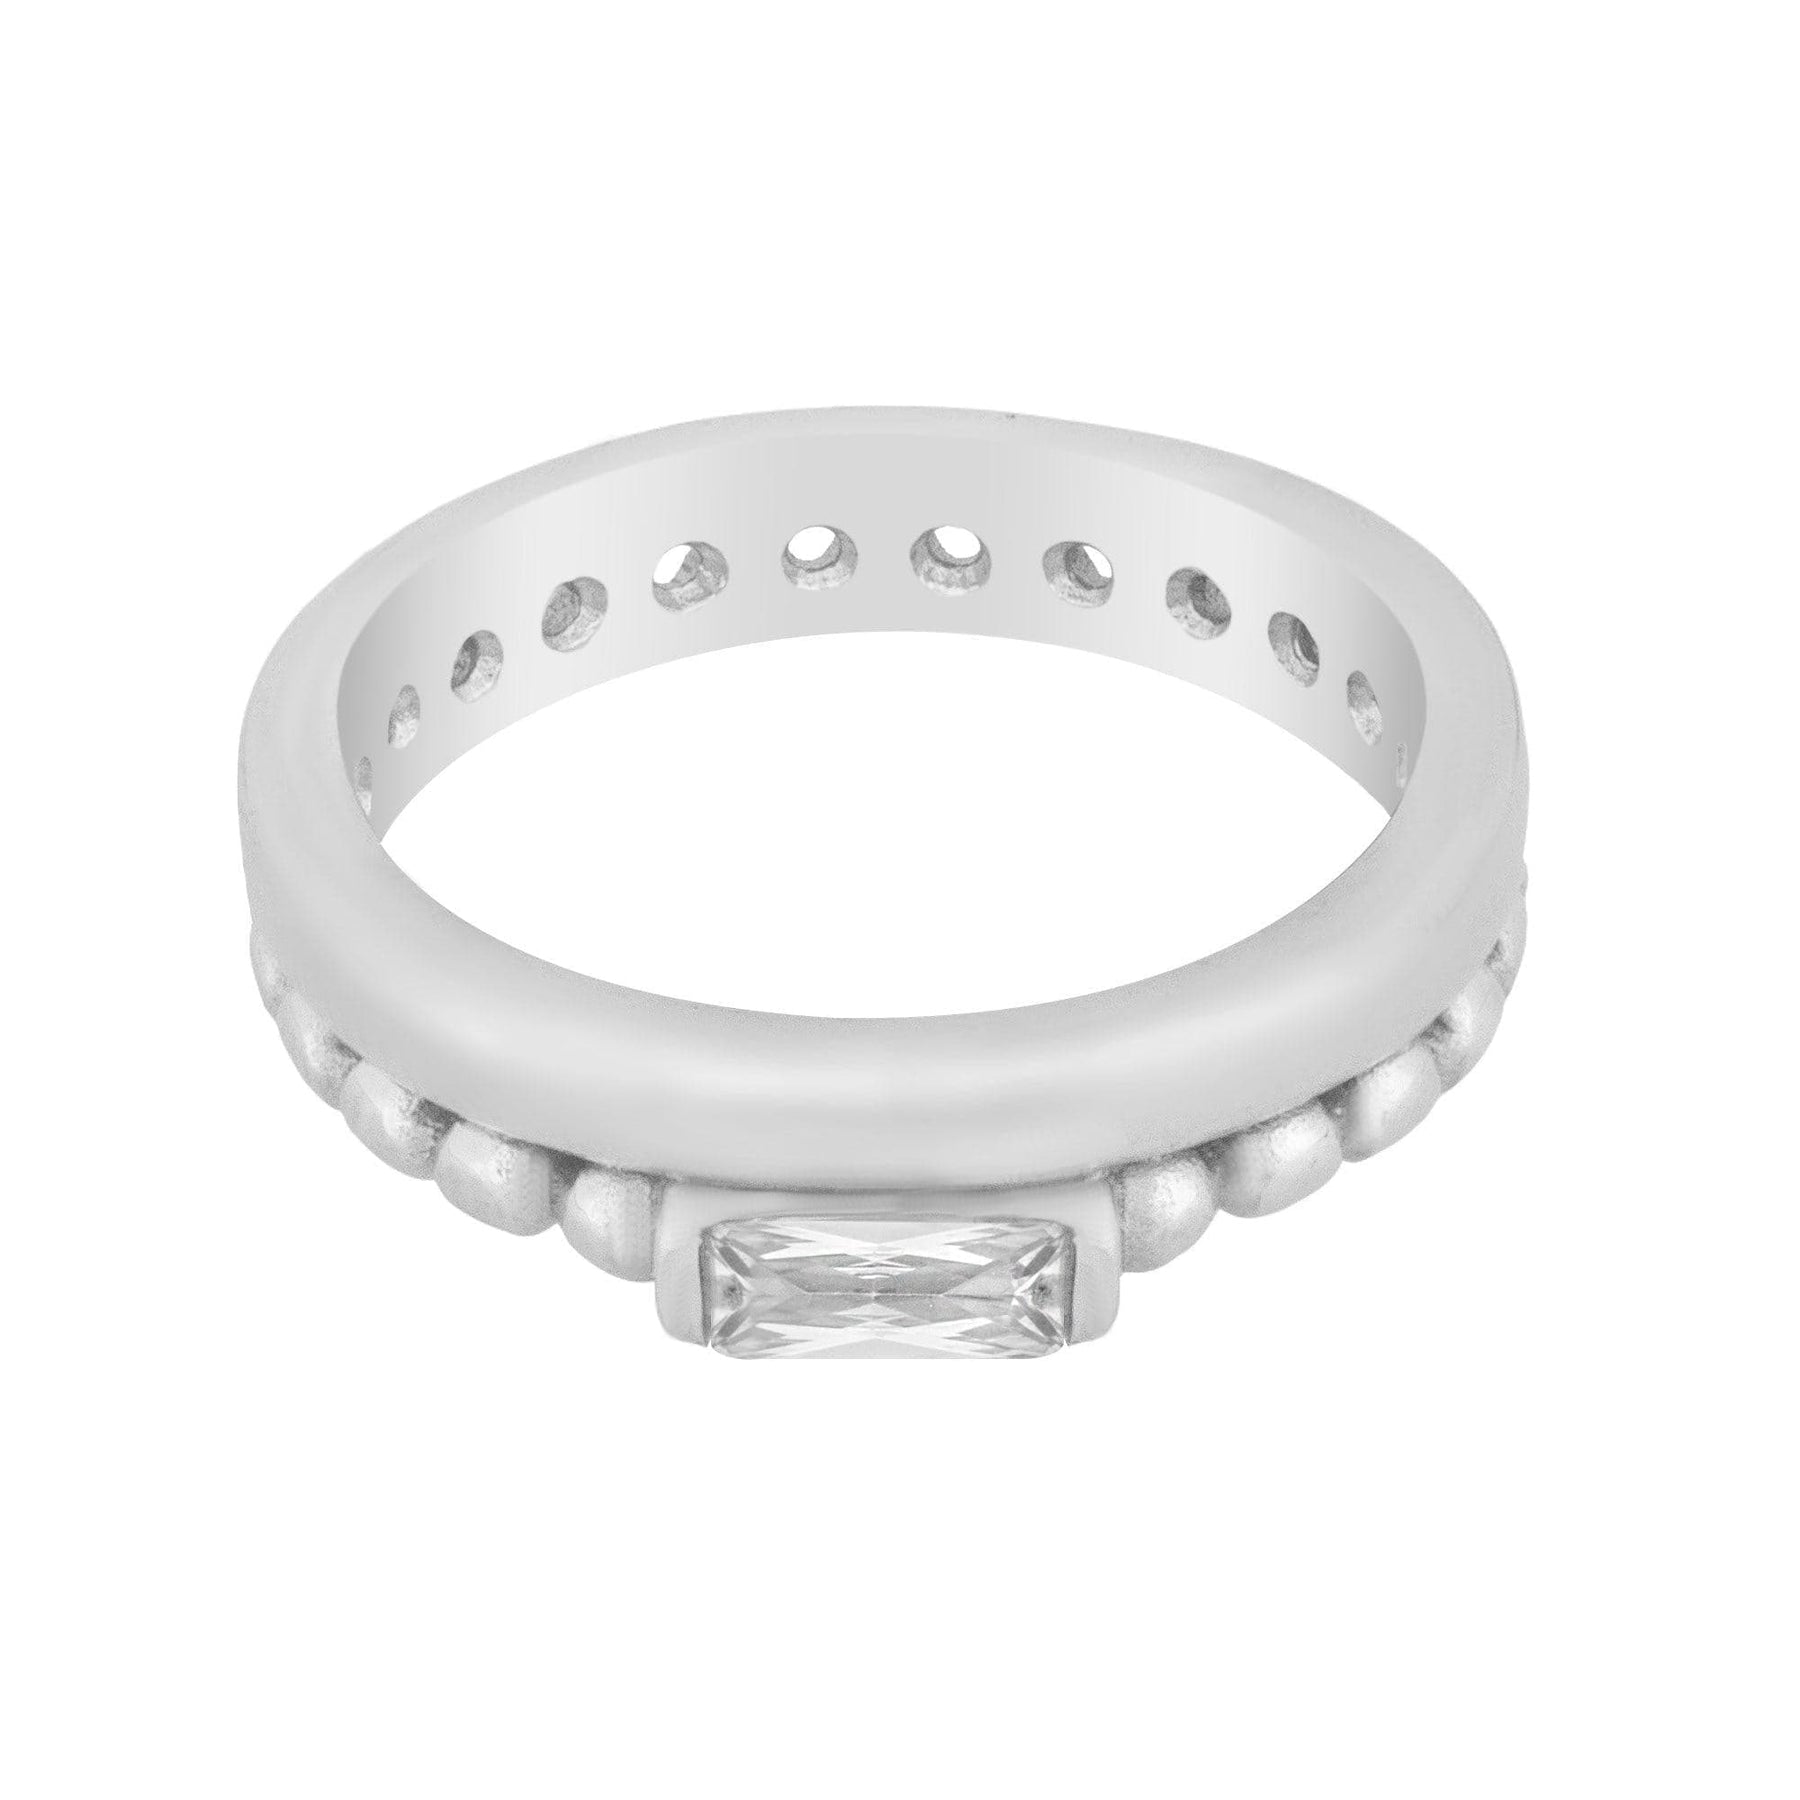 BohoMoon Stainless Steel Myla Ring Silver / US 5 / UK J / EUR 49 (x small)